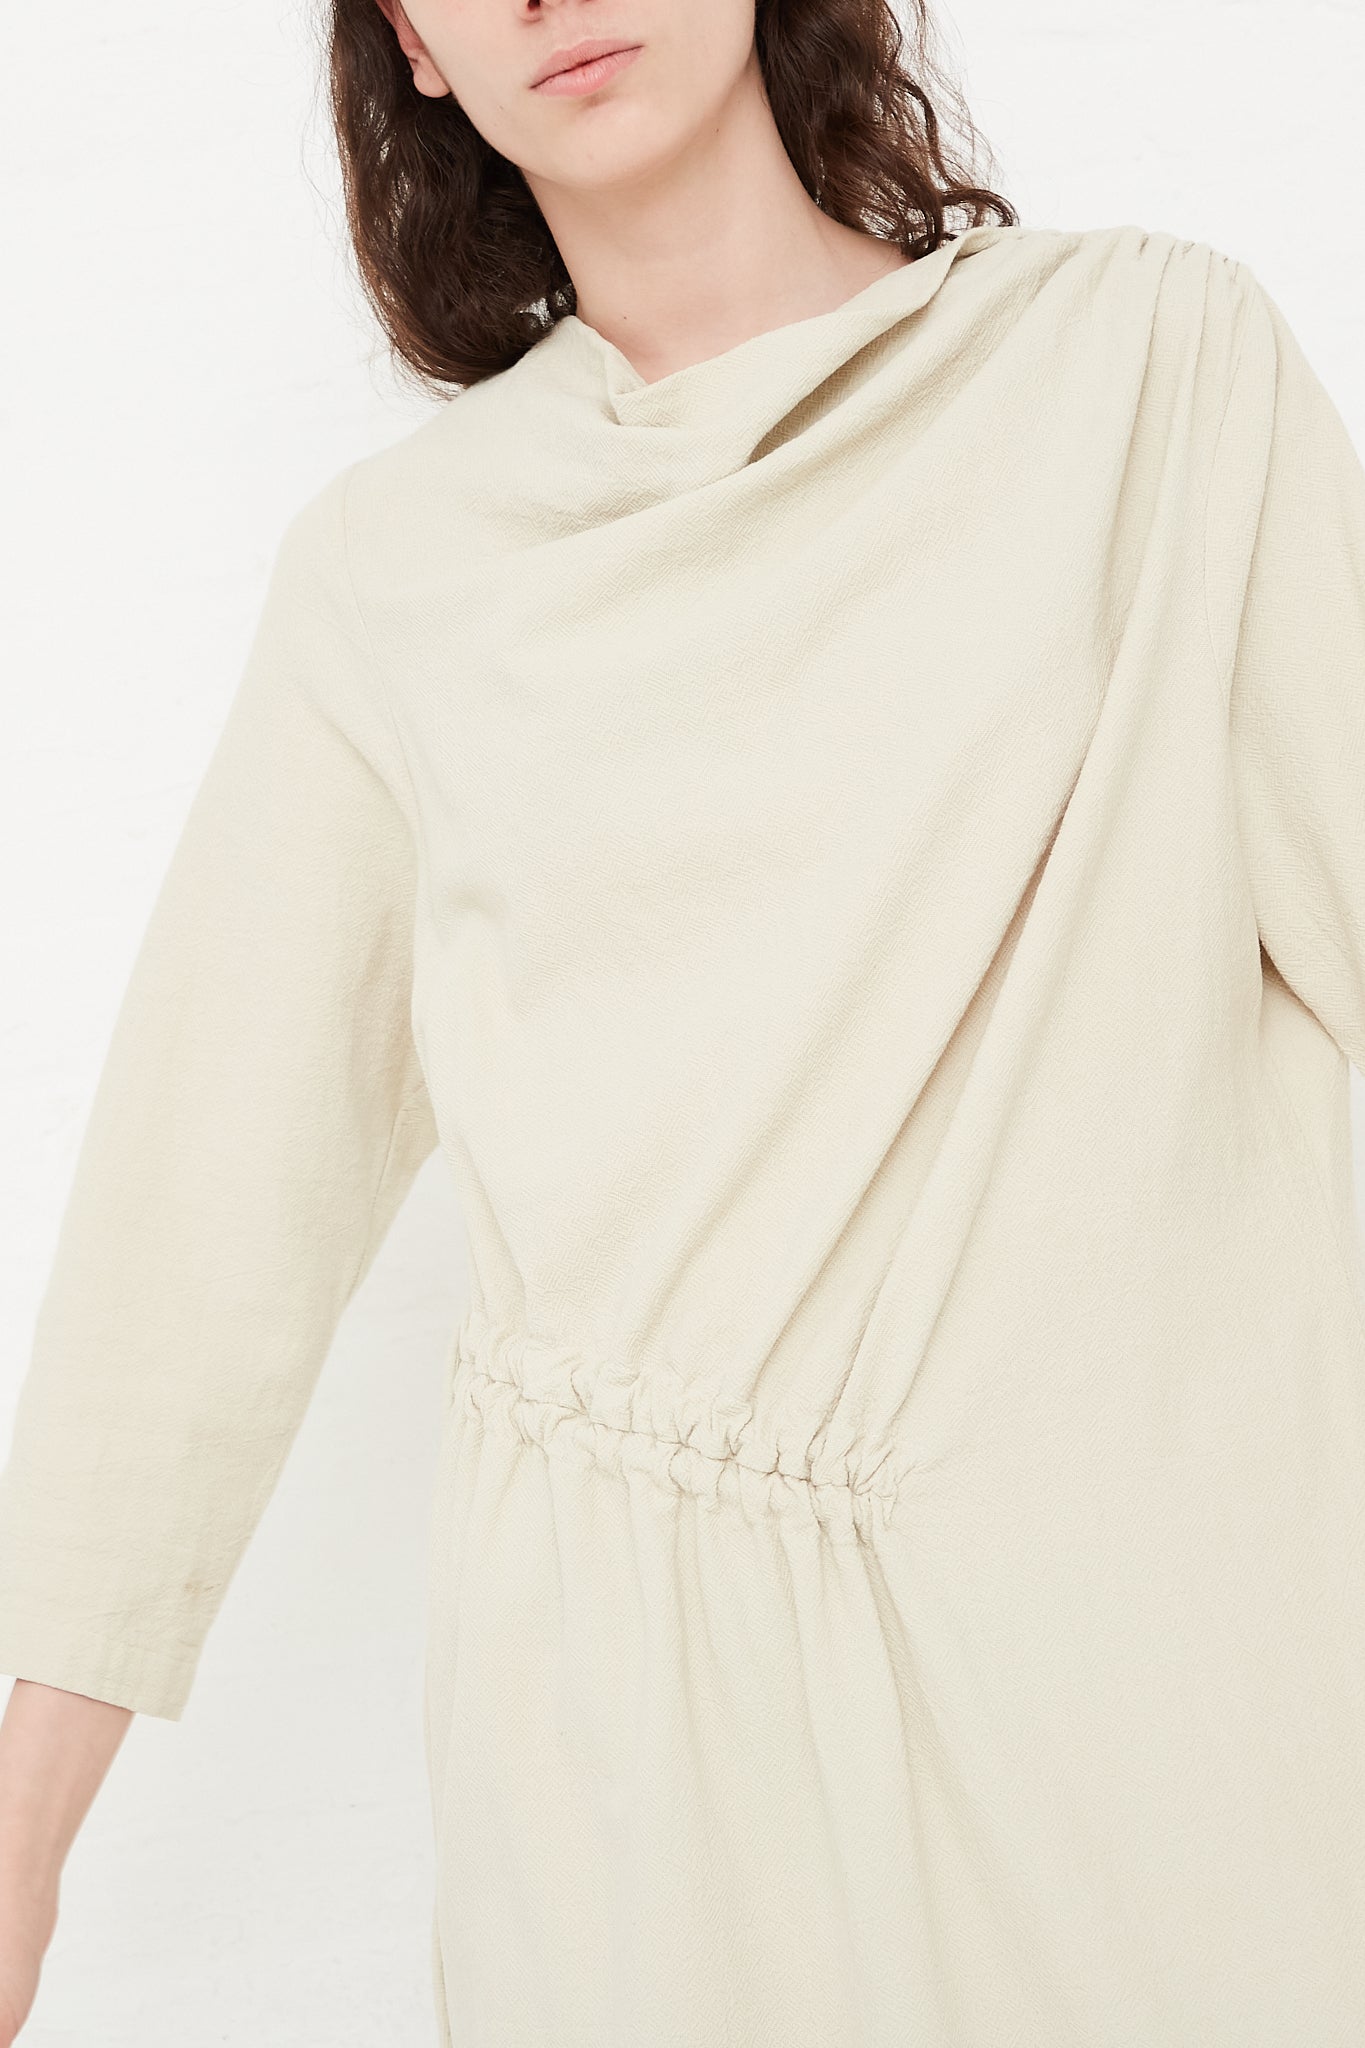 Cotton Woven Ruched Dress in Ivory by Black Crane for Oroboro Front Upclose